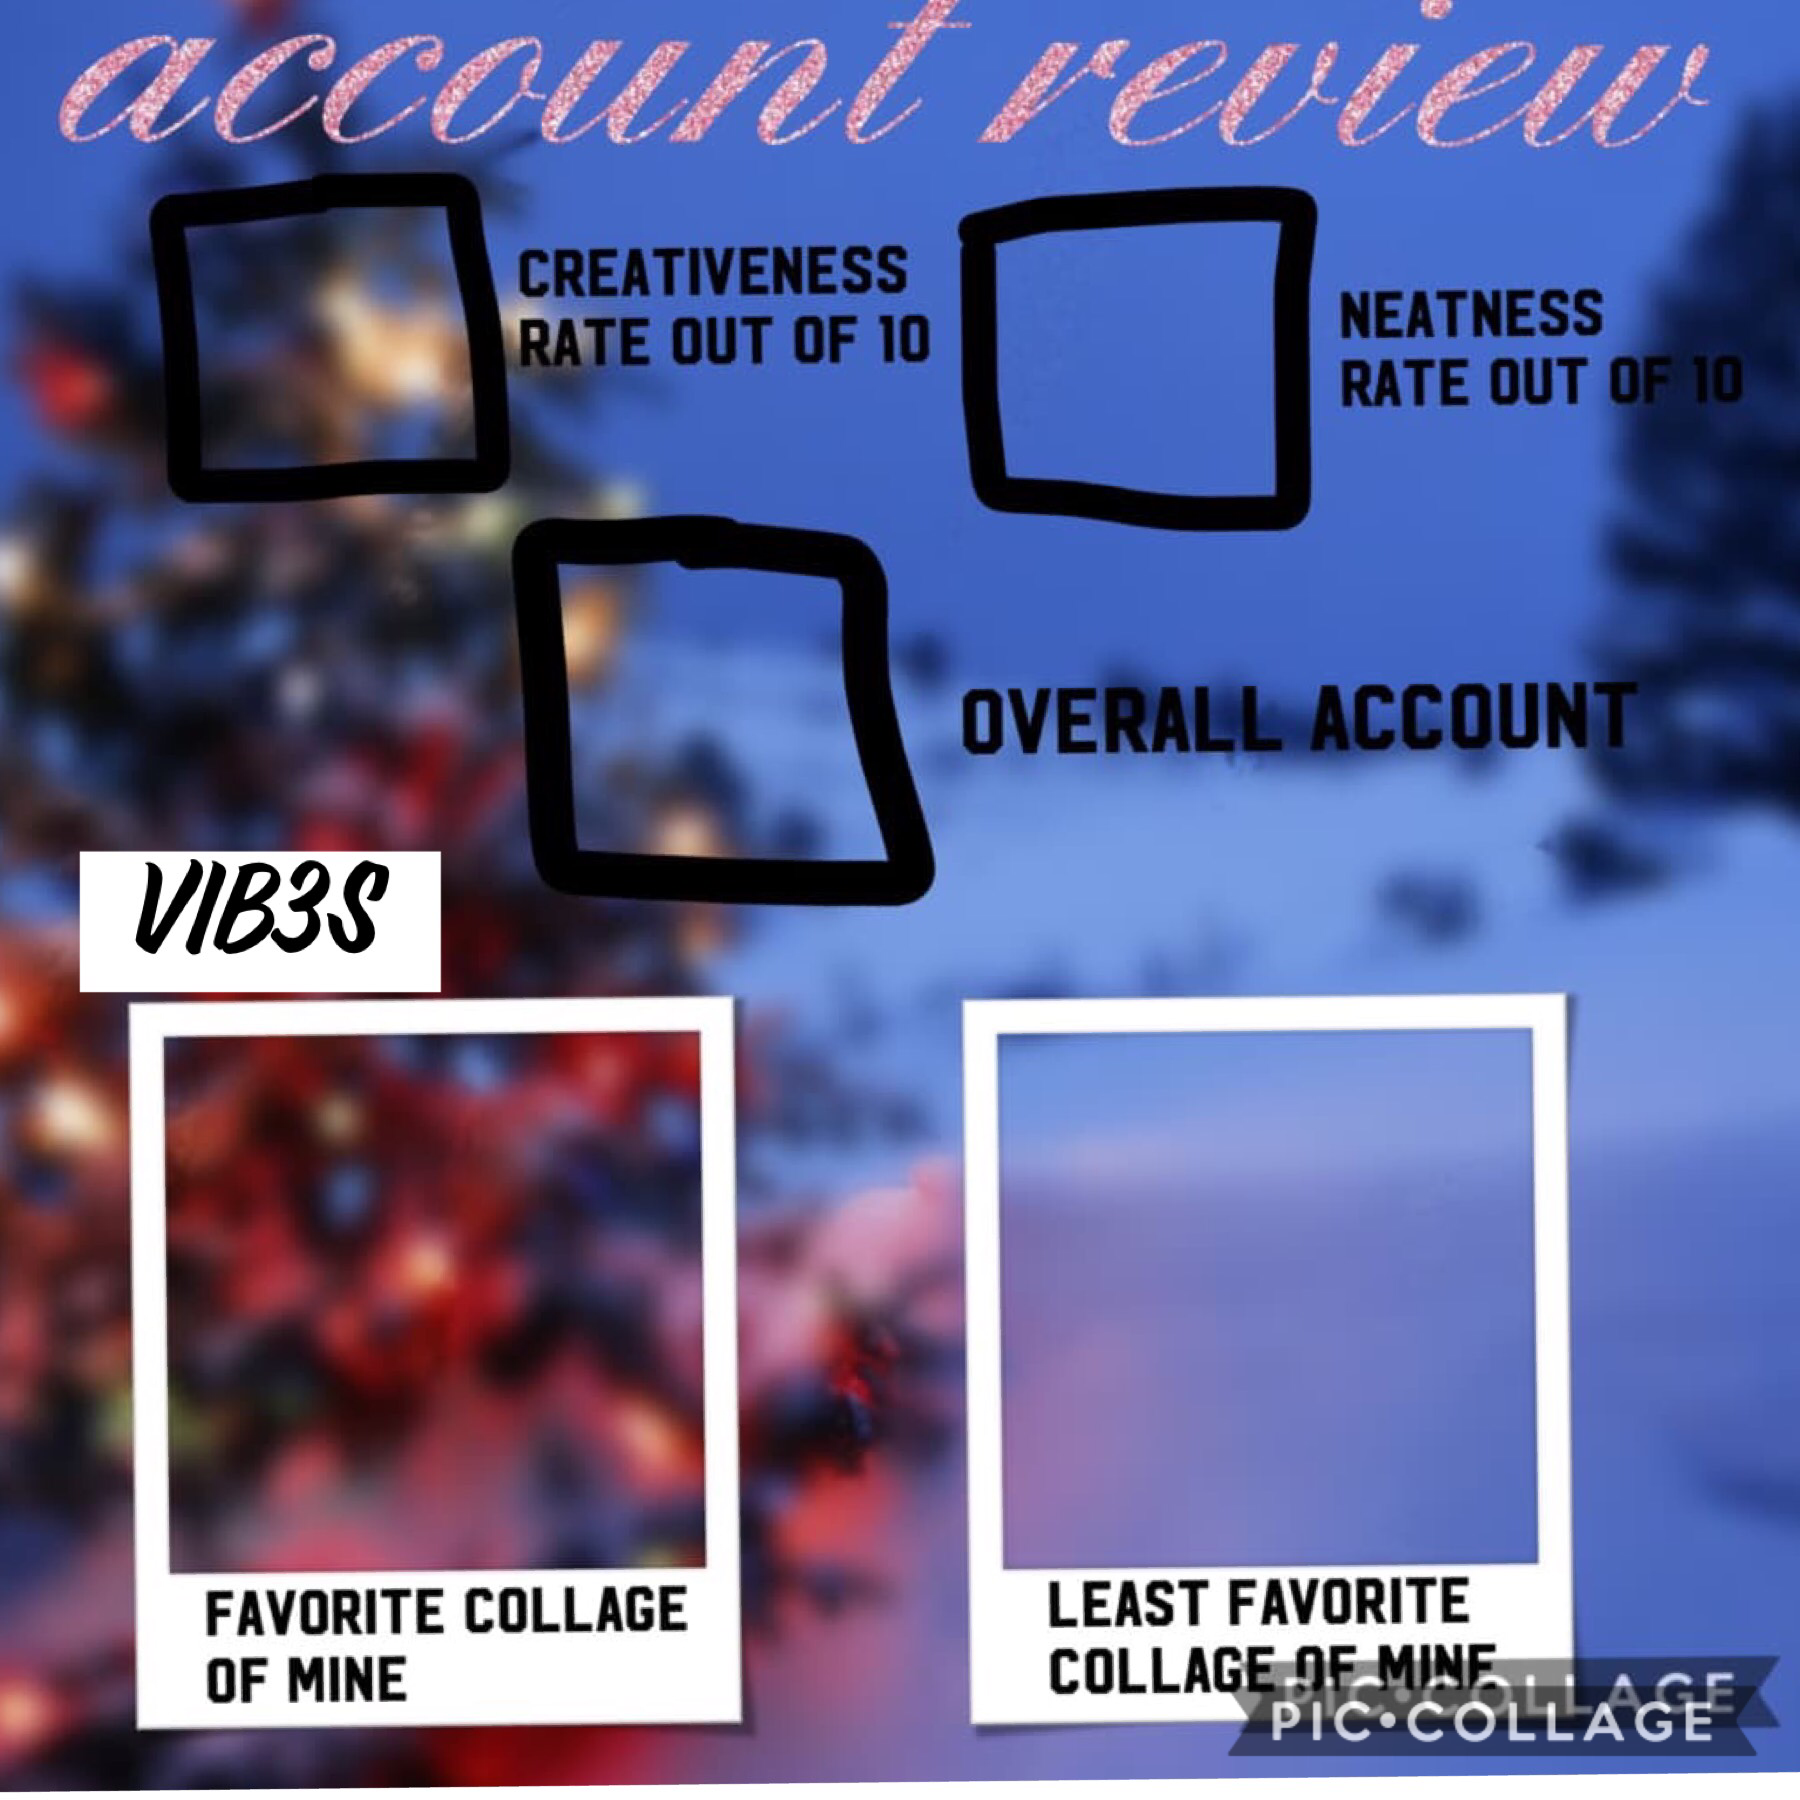 Account review!! Tap
QOTD: Who is your favorite collager or collagers?
AOTD All!!💘 